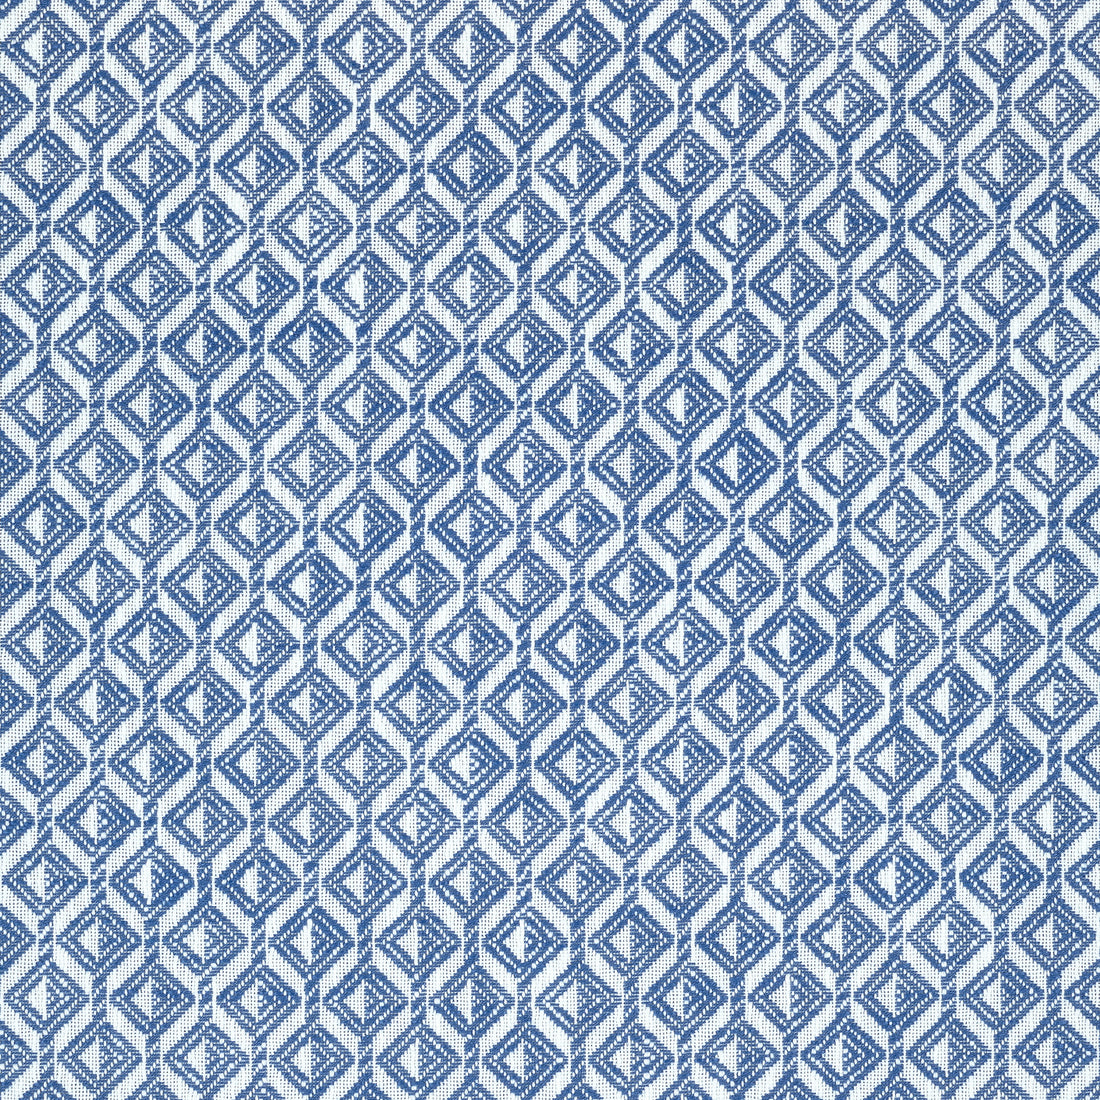 Trion fabric in royal blue color - pattern number W73456 - by Thibaut in the Landmark collection